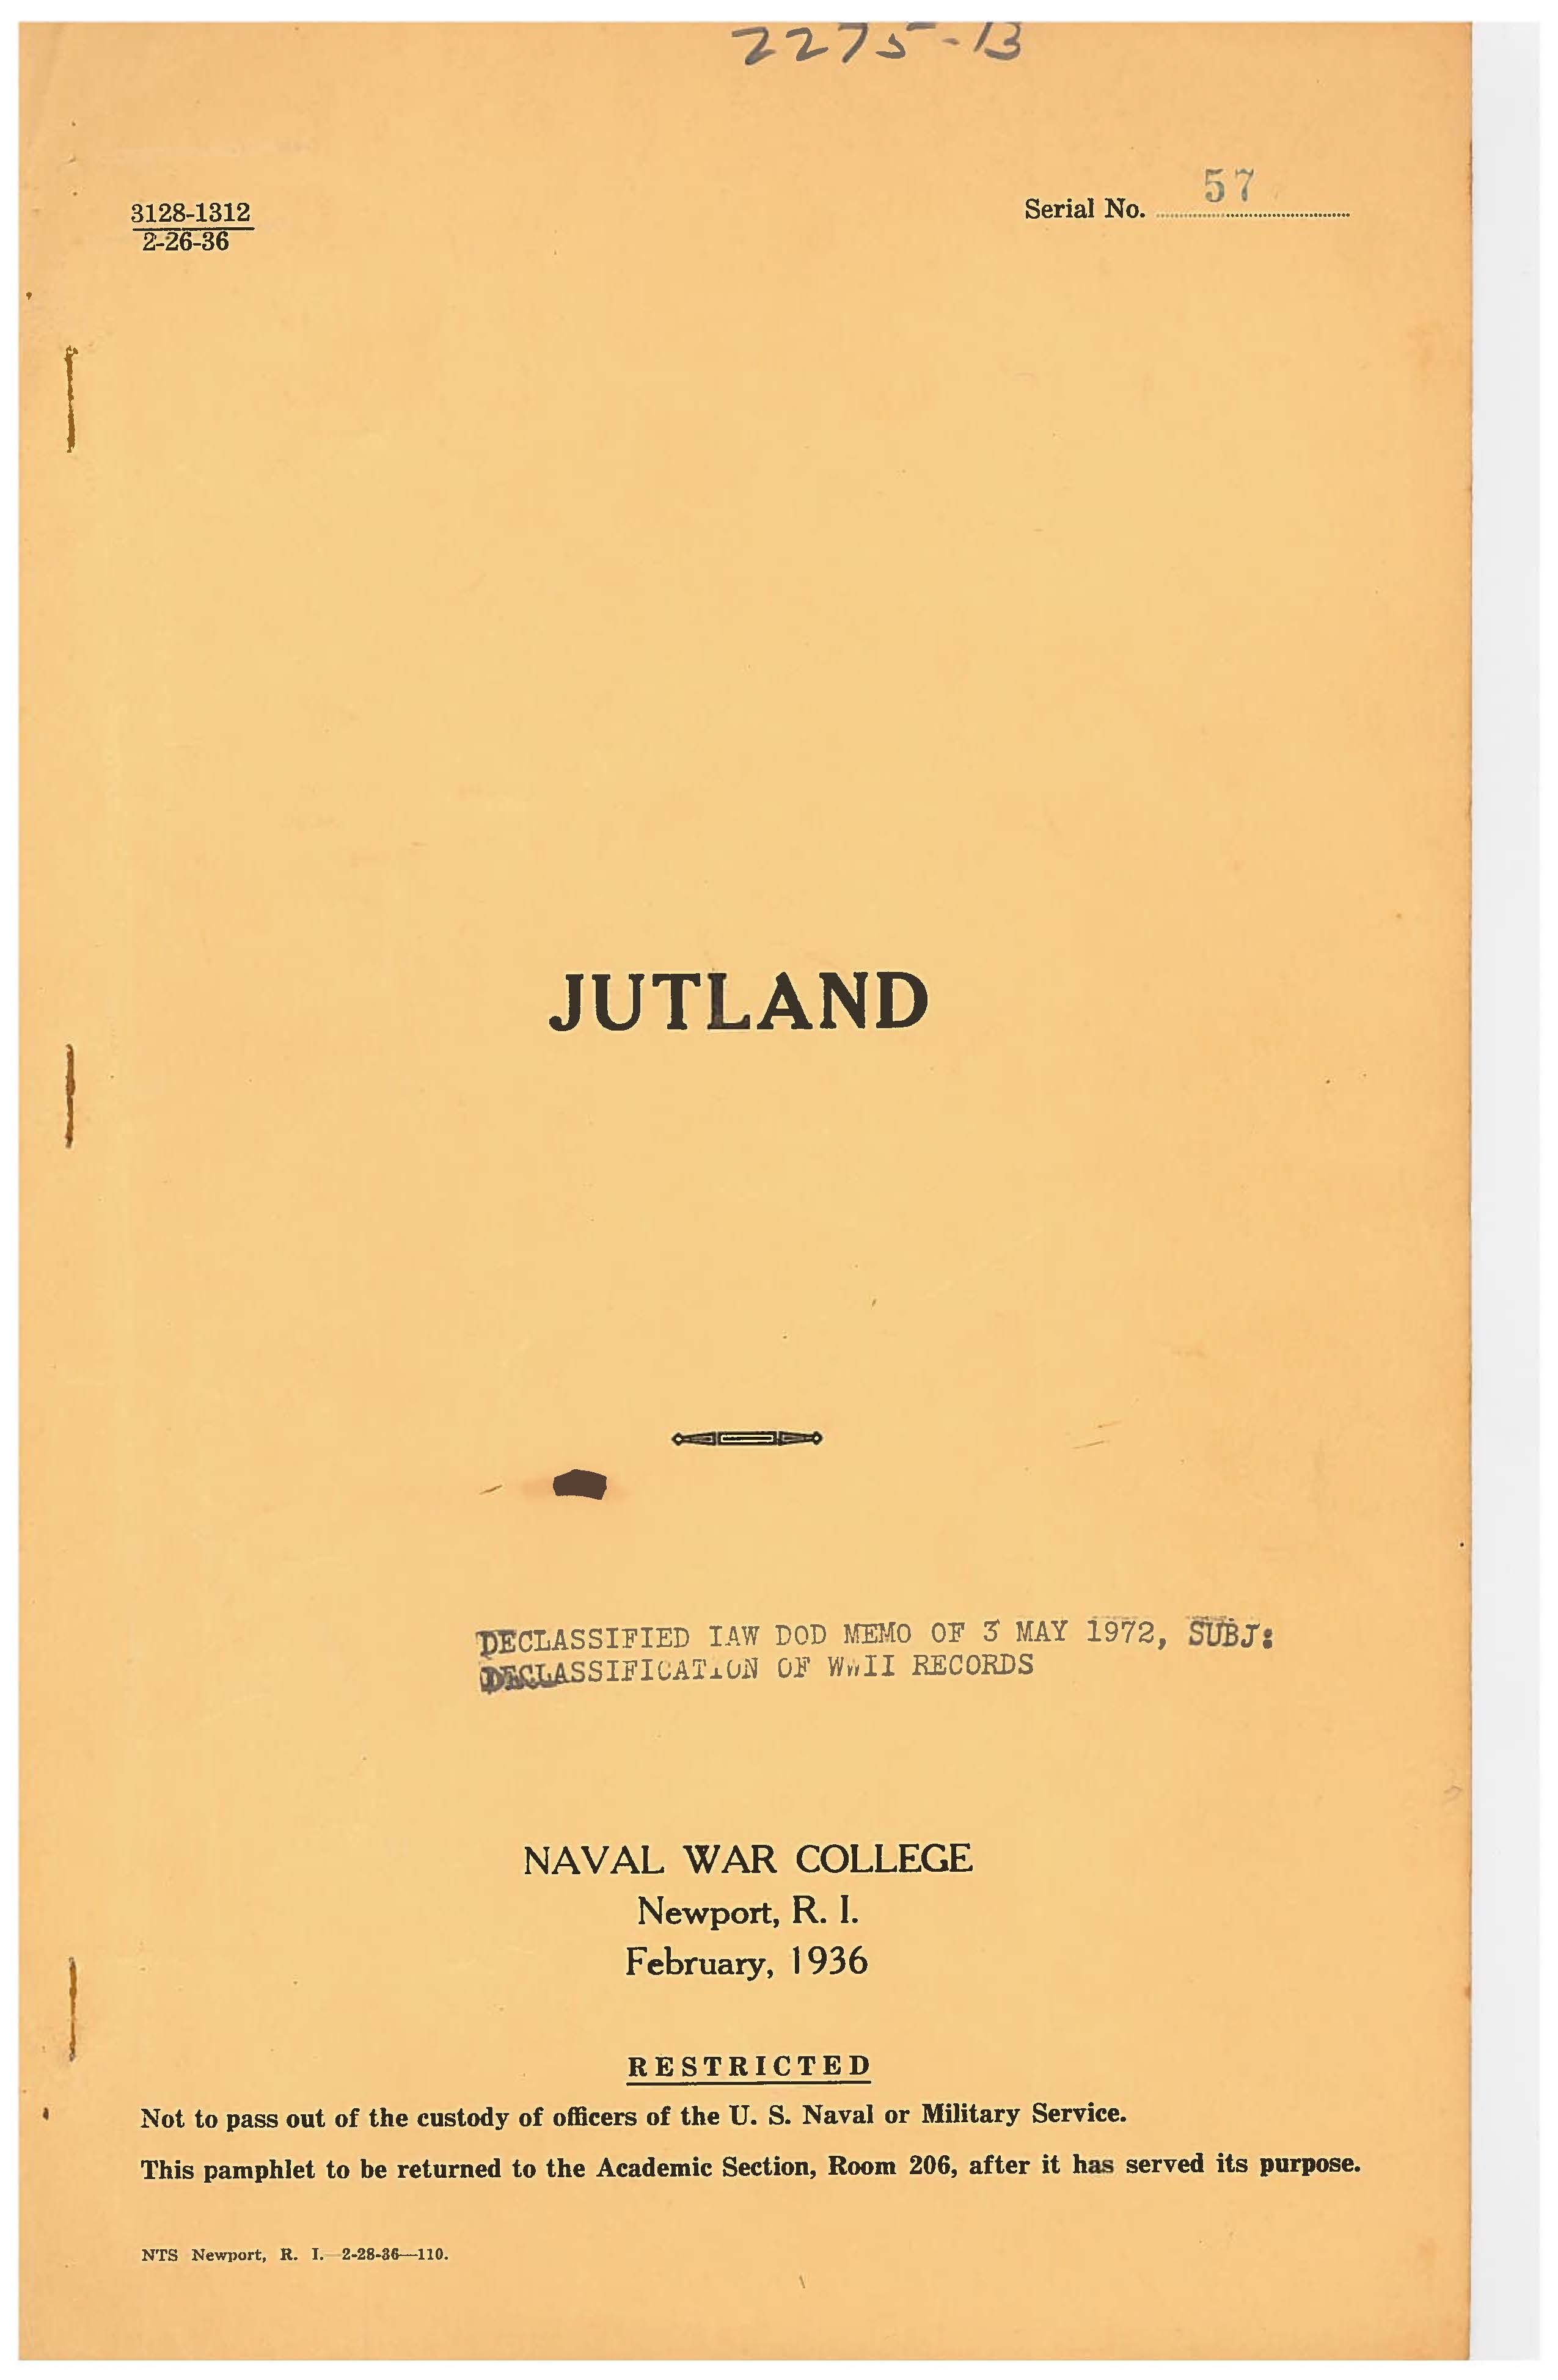 Jutland: Remarks of Vice Admiral the Honorable Sir Matthew Robert Best, K.C.B., D.S.O., M.V.O., R.N., Commander-in-Chief America and West Indies Station, and Flag Captain H.P. Boxer, R.N., executive order of H.M.S. York, upon the Battle of Jutland